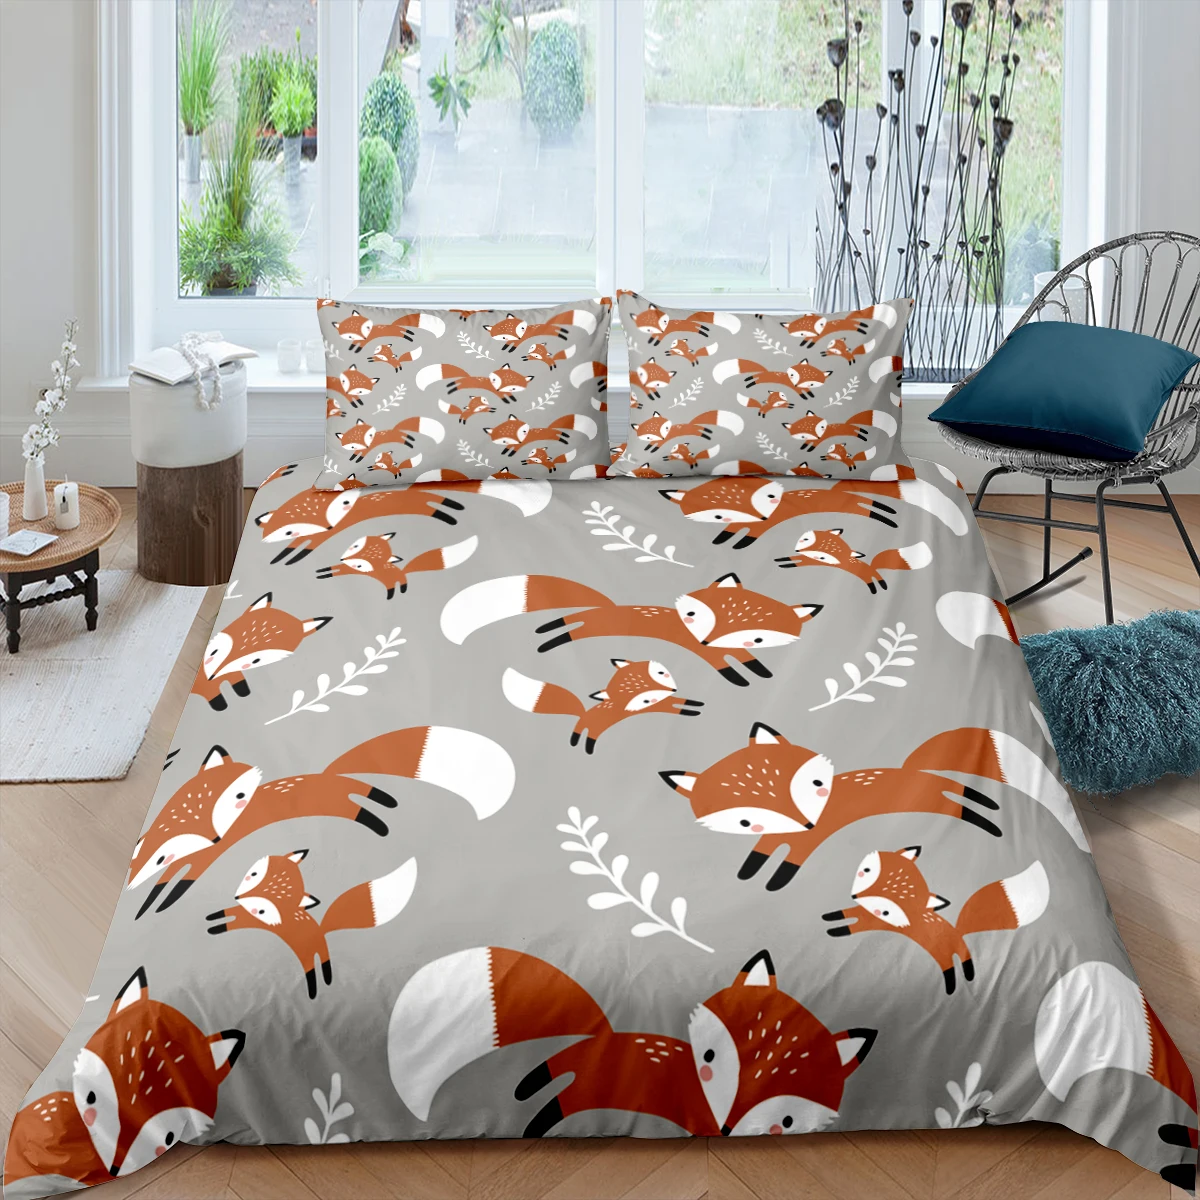 Home Textiles Luxury 3D Cartoon Fox Duvet Cover Set Pillowcase Animals Bedding Set Queen and King Size Comforter Bedding Sets best bed sheets Bedding Sets